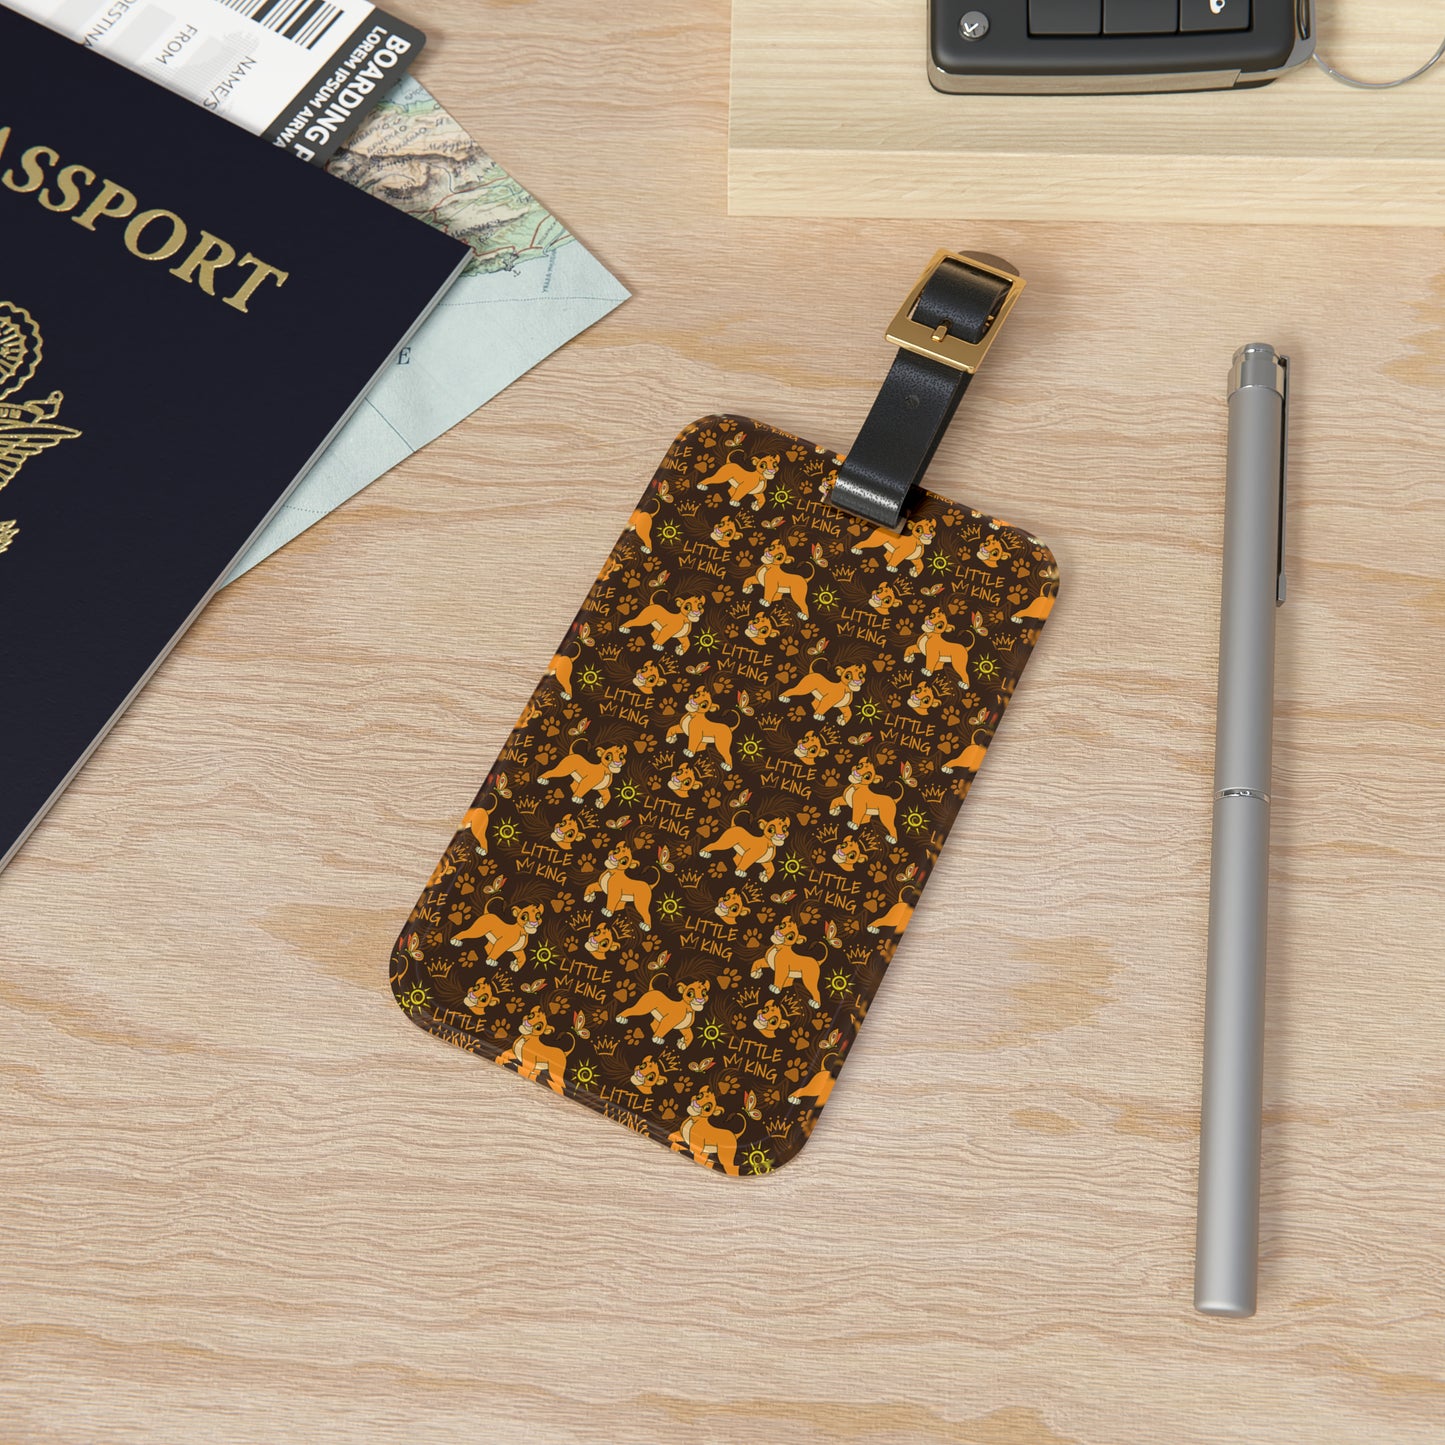 Little King Luggage Tag